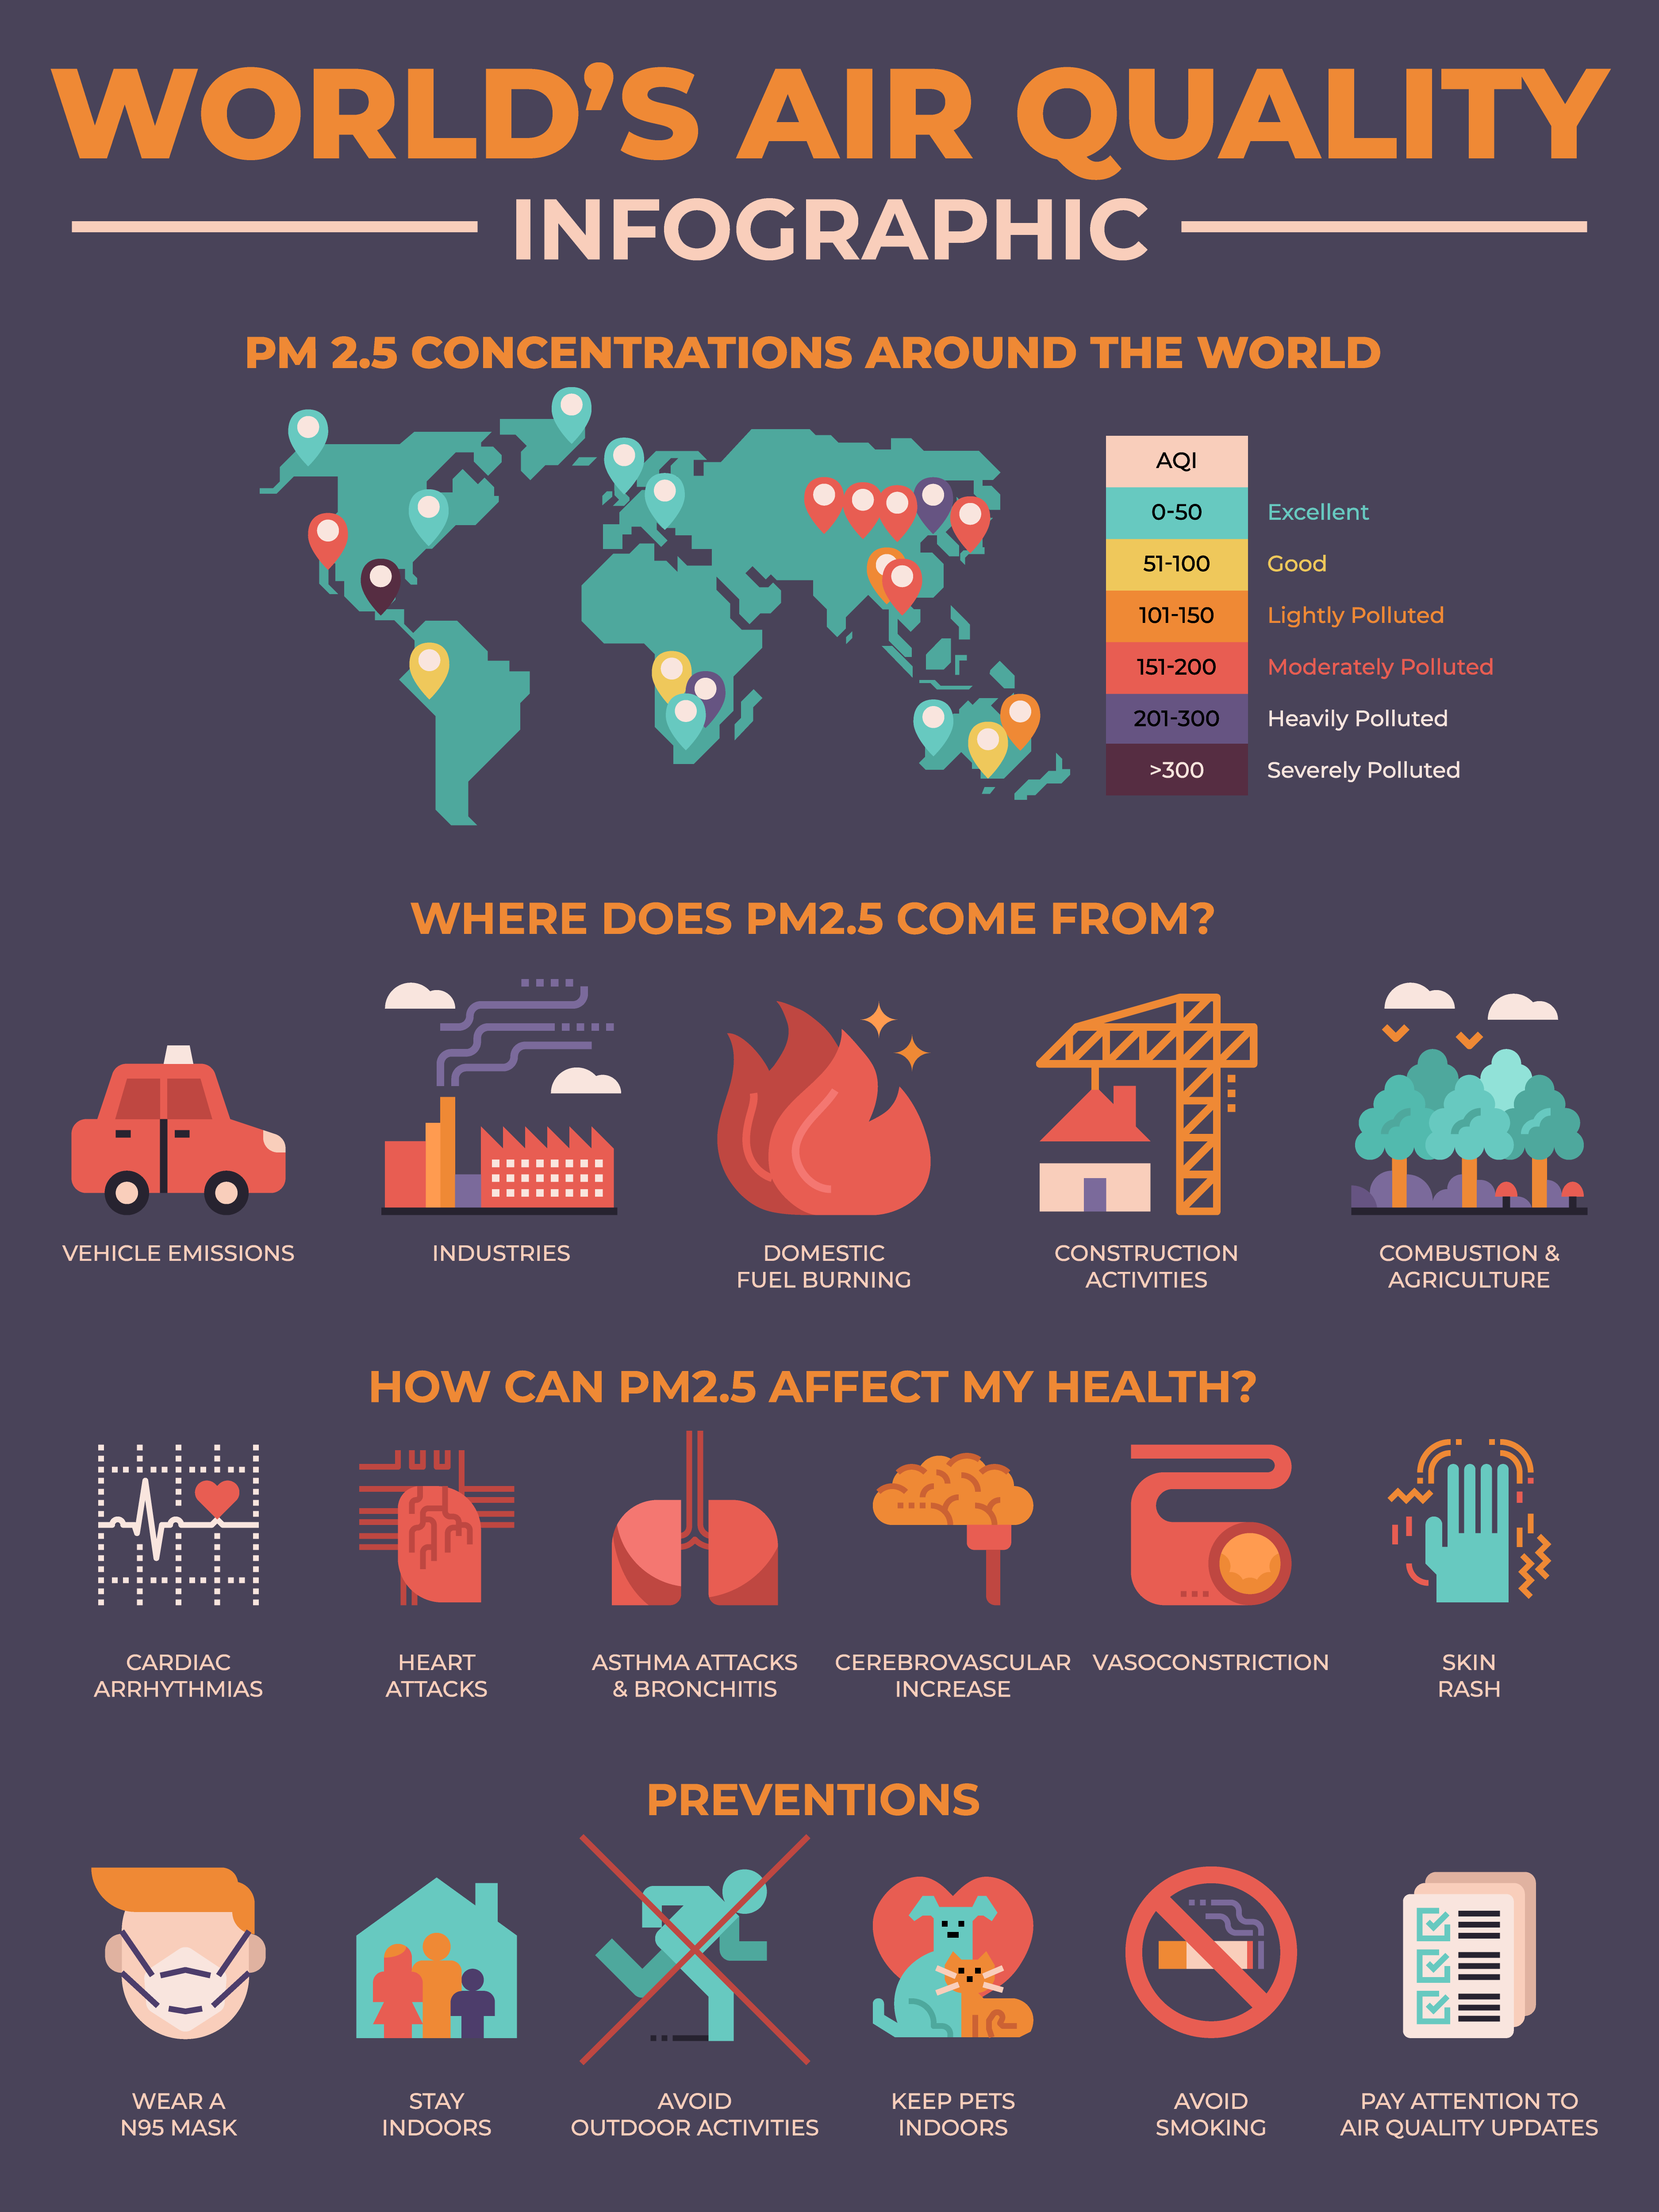 World's air quality infographic. Shows a rough map of the world whosing 